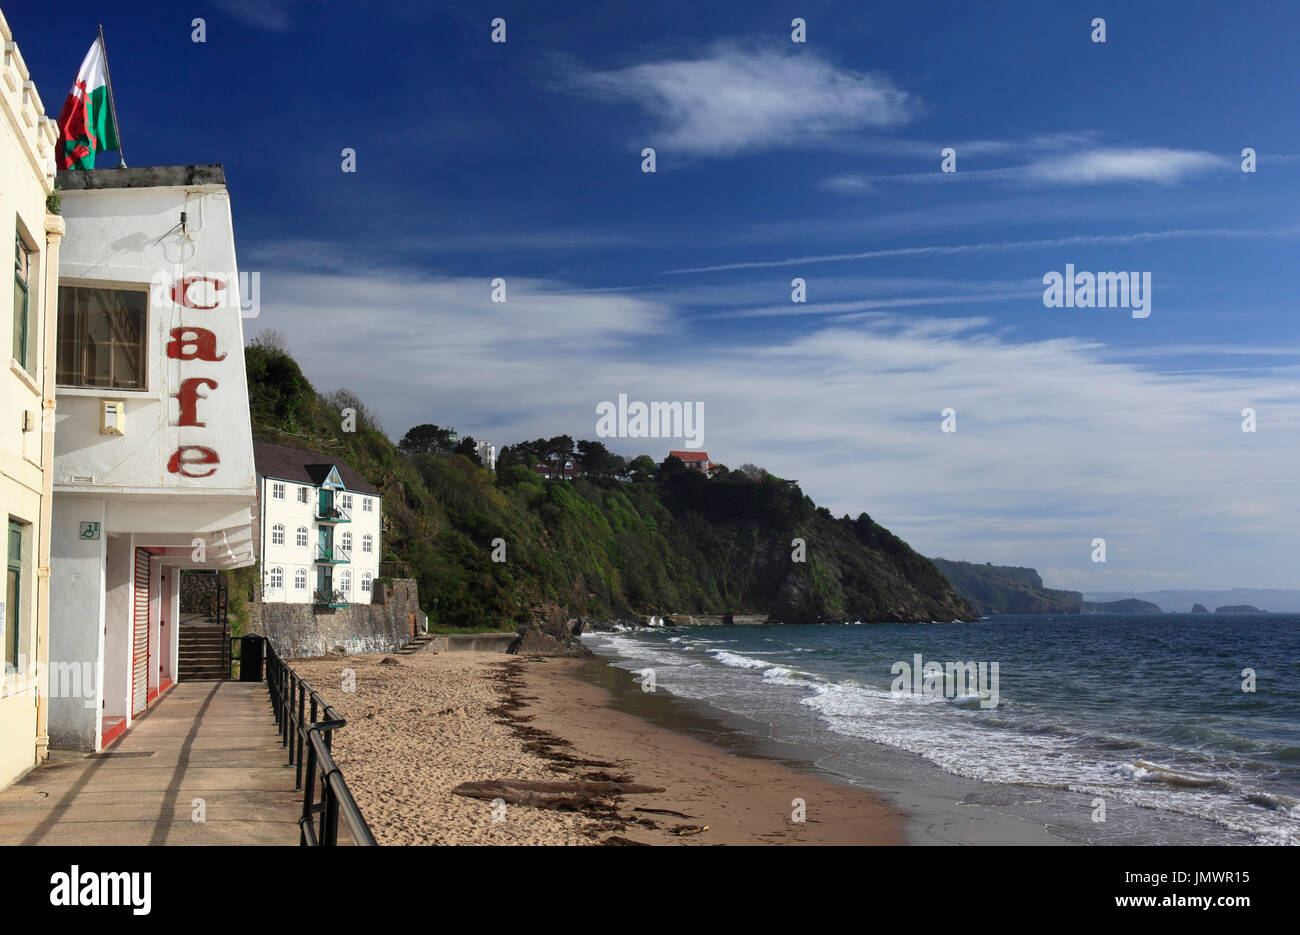 Cafe on Tenby's North Beach, Tenby, Pembrokeshire, Wales, Europe Stock Photo